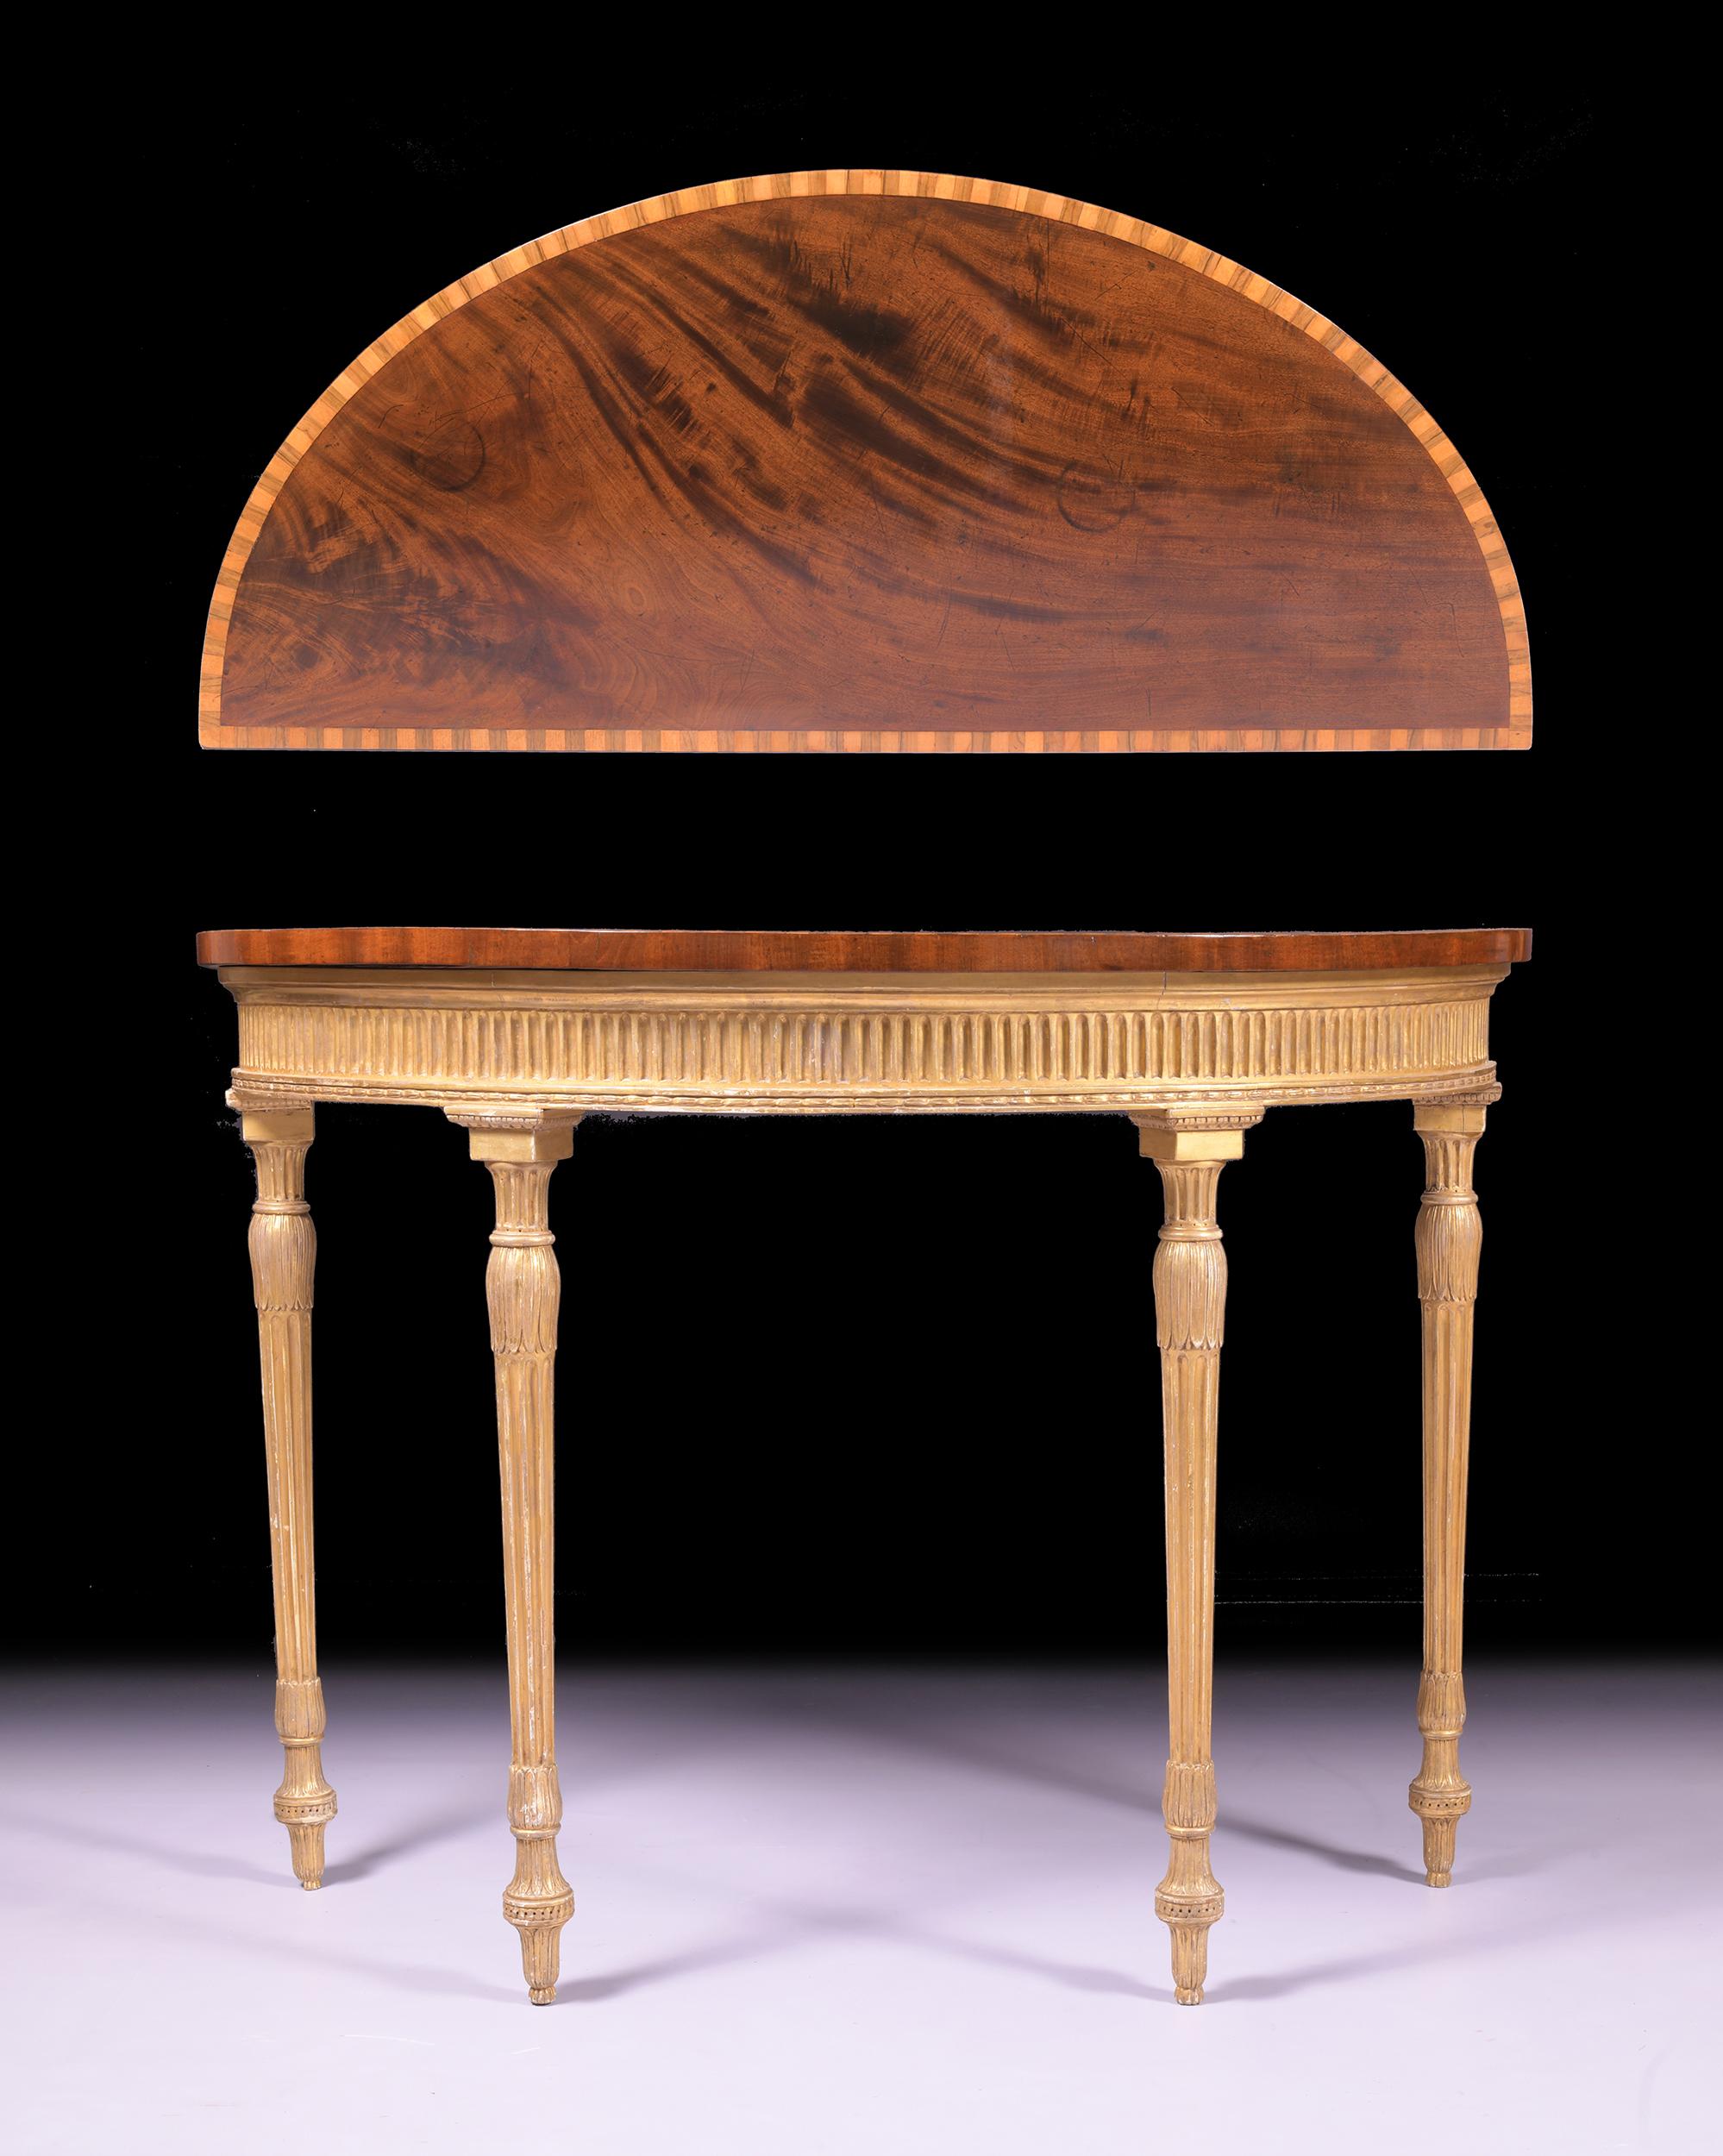 A fine George III console table in the Adam style, the demi-lune mahogany top crossbanded in various woods, above a moulded fluted frieze on lotus leaf carved and fluted tapering legs.

Circa 1790

English

Footnotes:

Pier tables such as